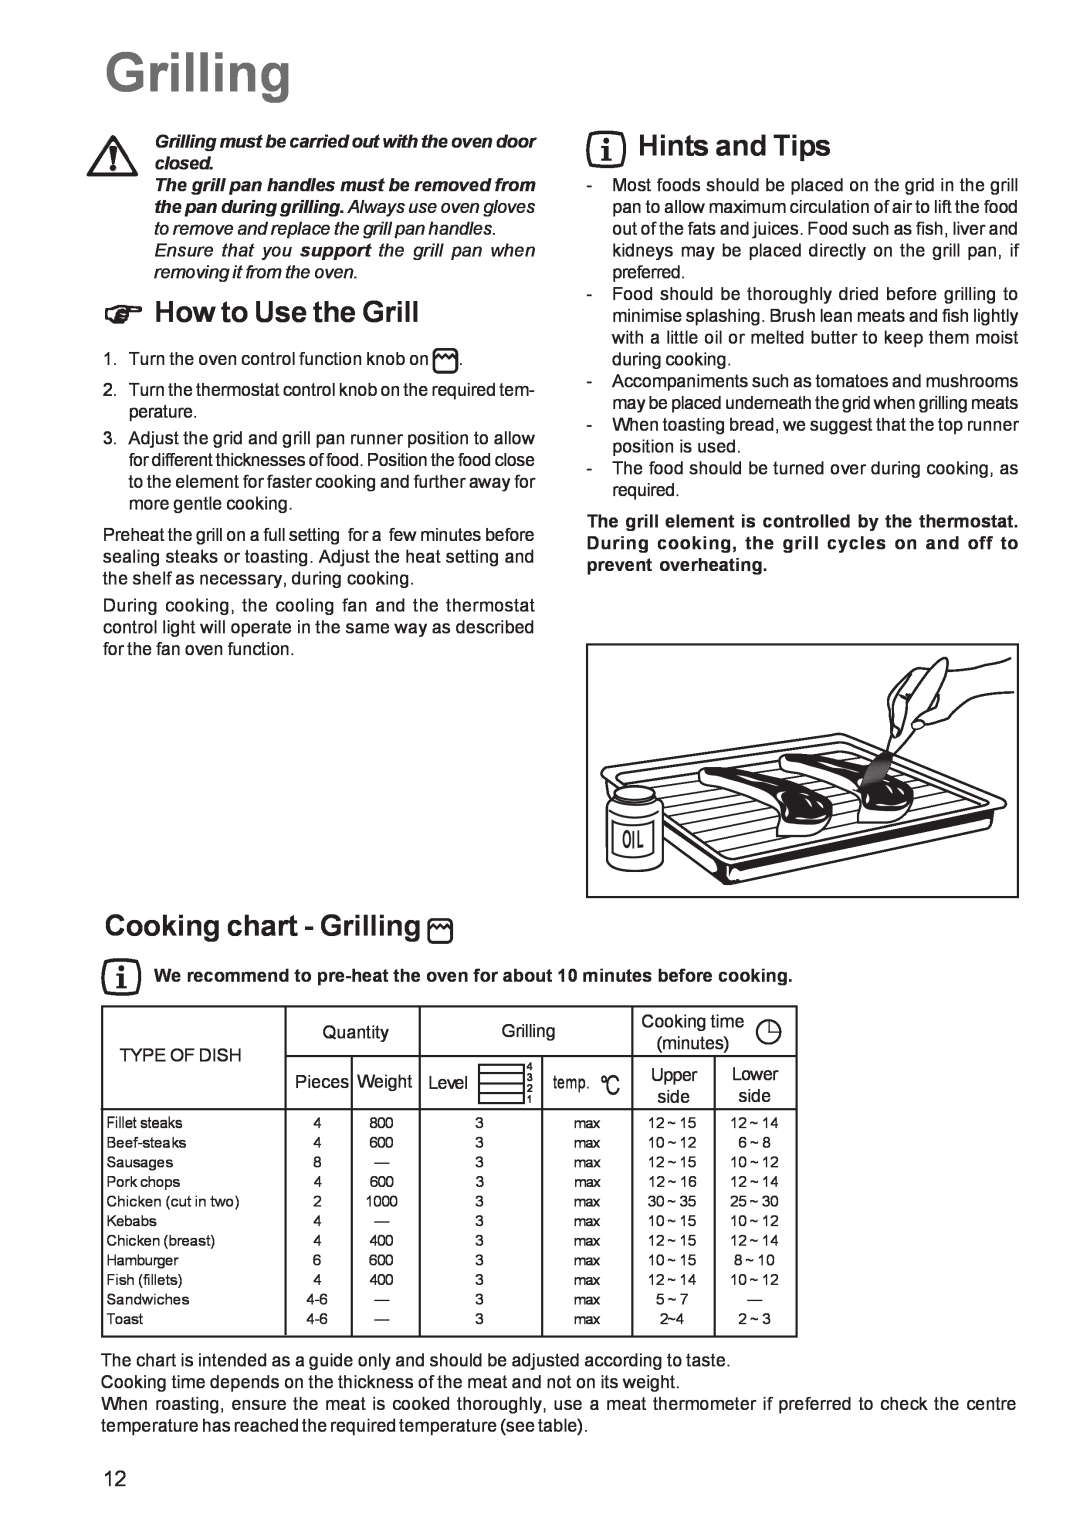 Zanussi ZBF 360 manual How to Use the Grill, Cooking chart - Grilling, Hints and Tips 